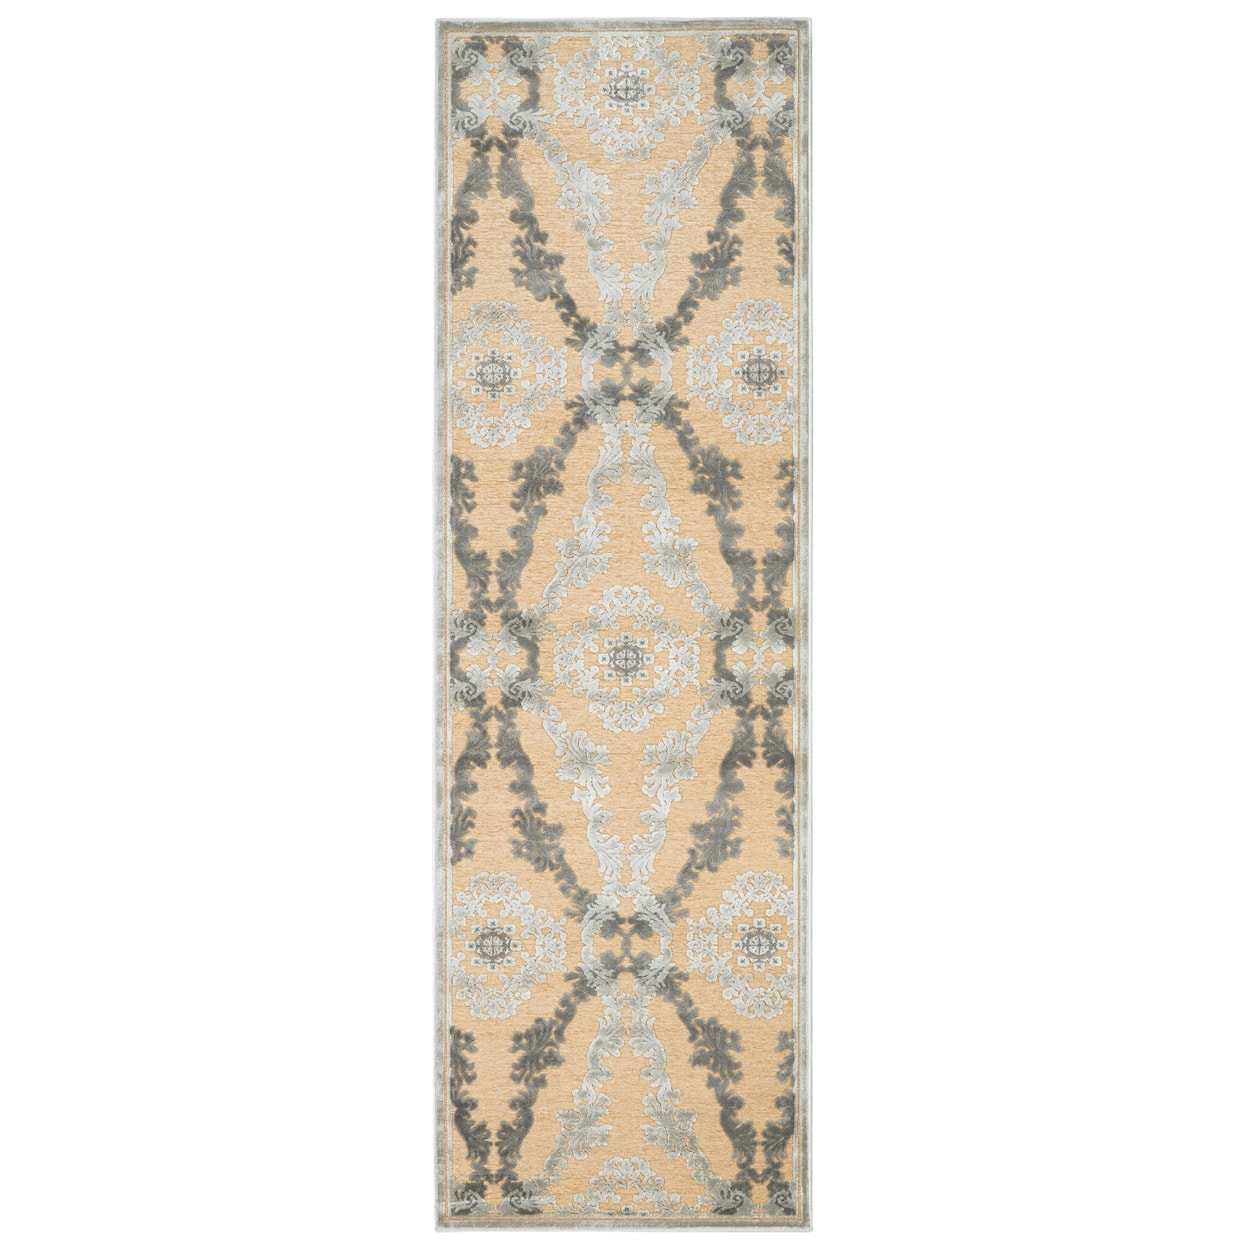 Feizy Rugs Saphir Ivory/Silver 7'-6" X 7'-6" Round Area Rug